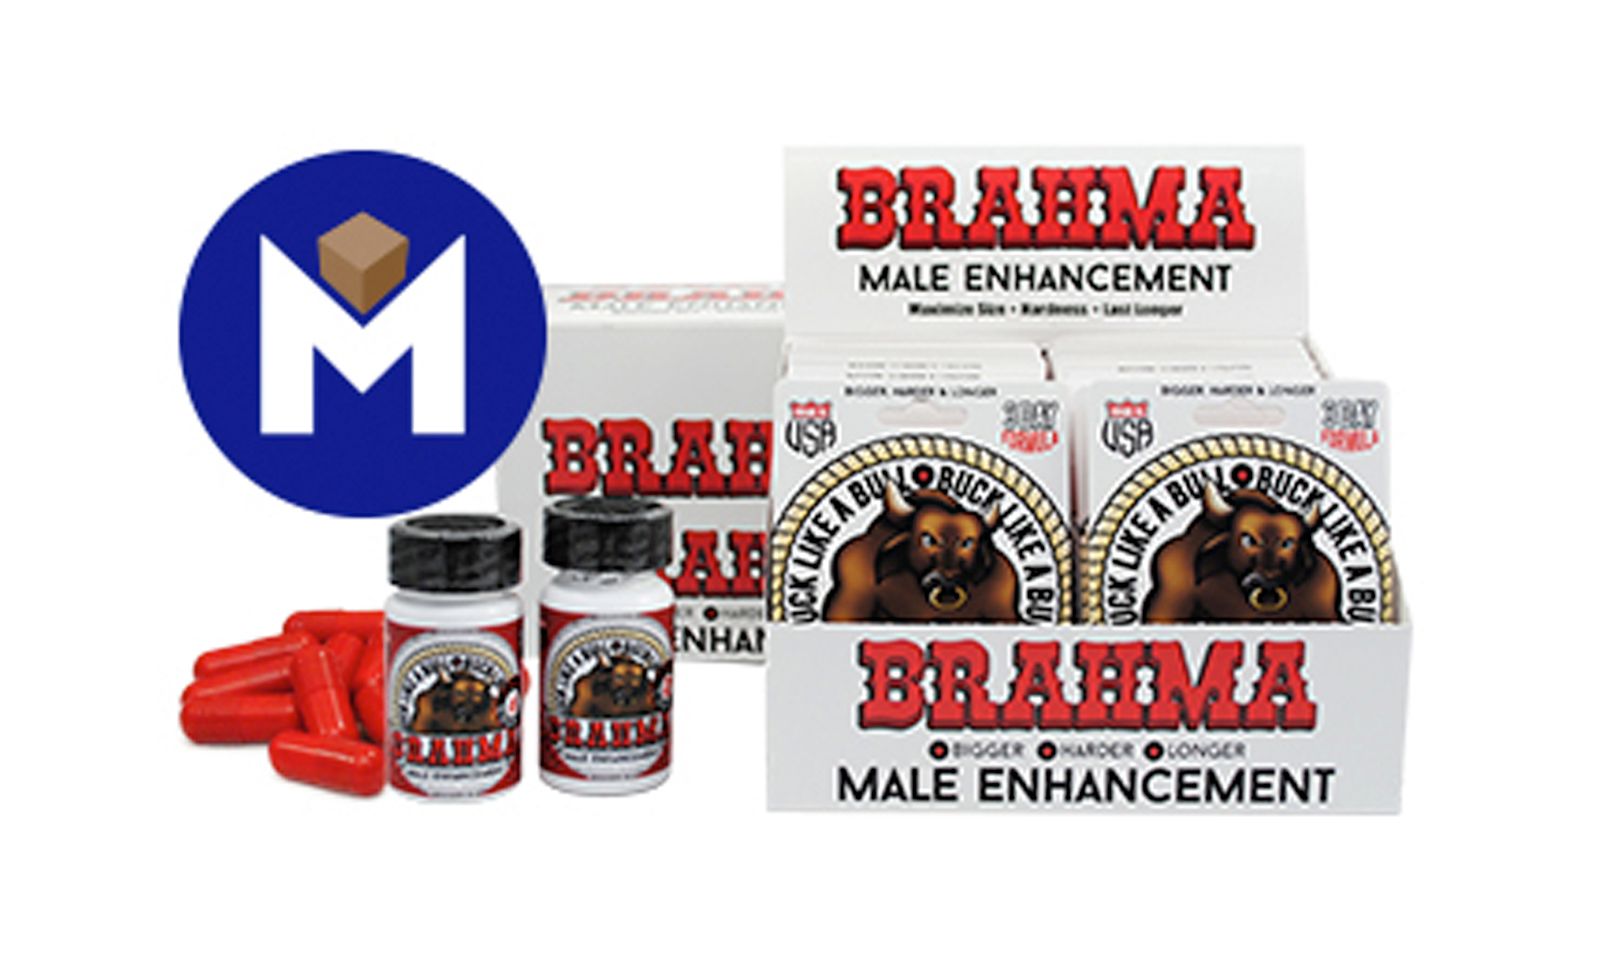 Metro Issues Challenge to Retailers of Brahma Pill